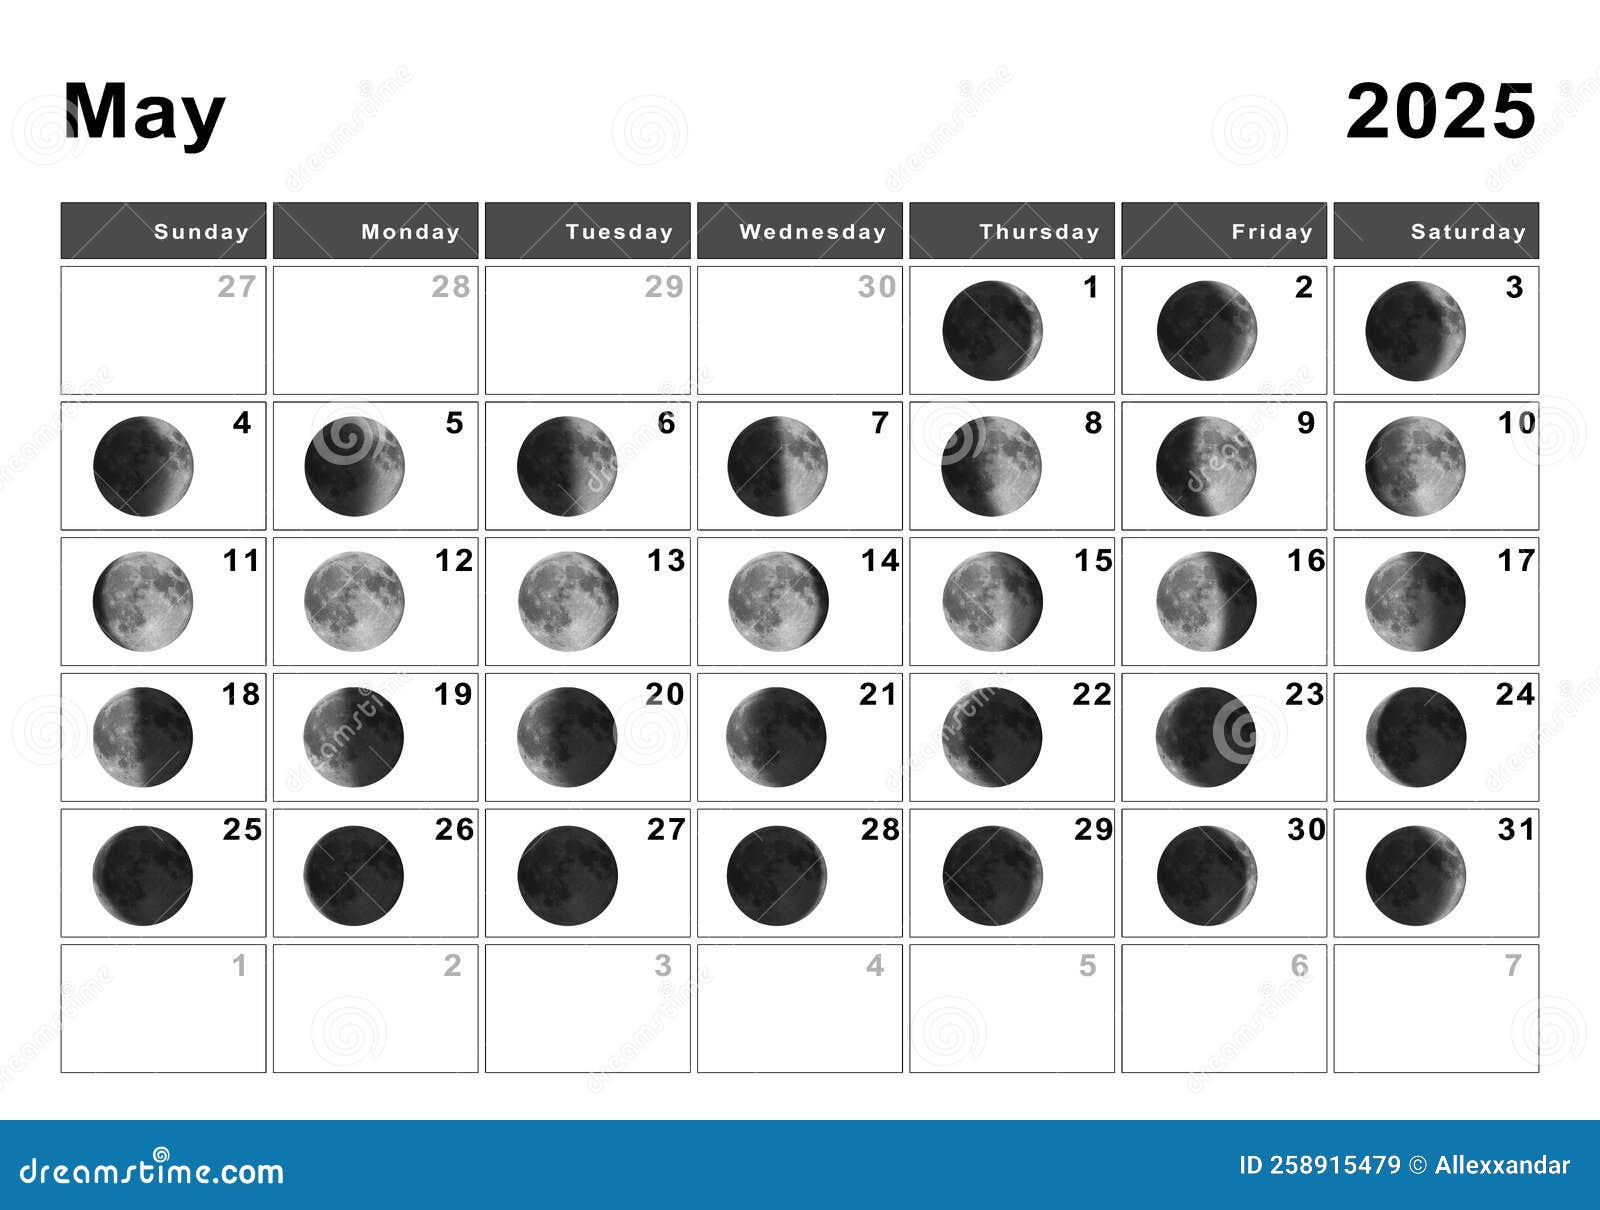 may-2025-lunar-calendar-moon-cycles-stock-illustration-illustration-of-cycle-office-258915479